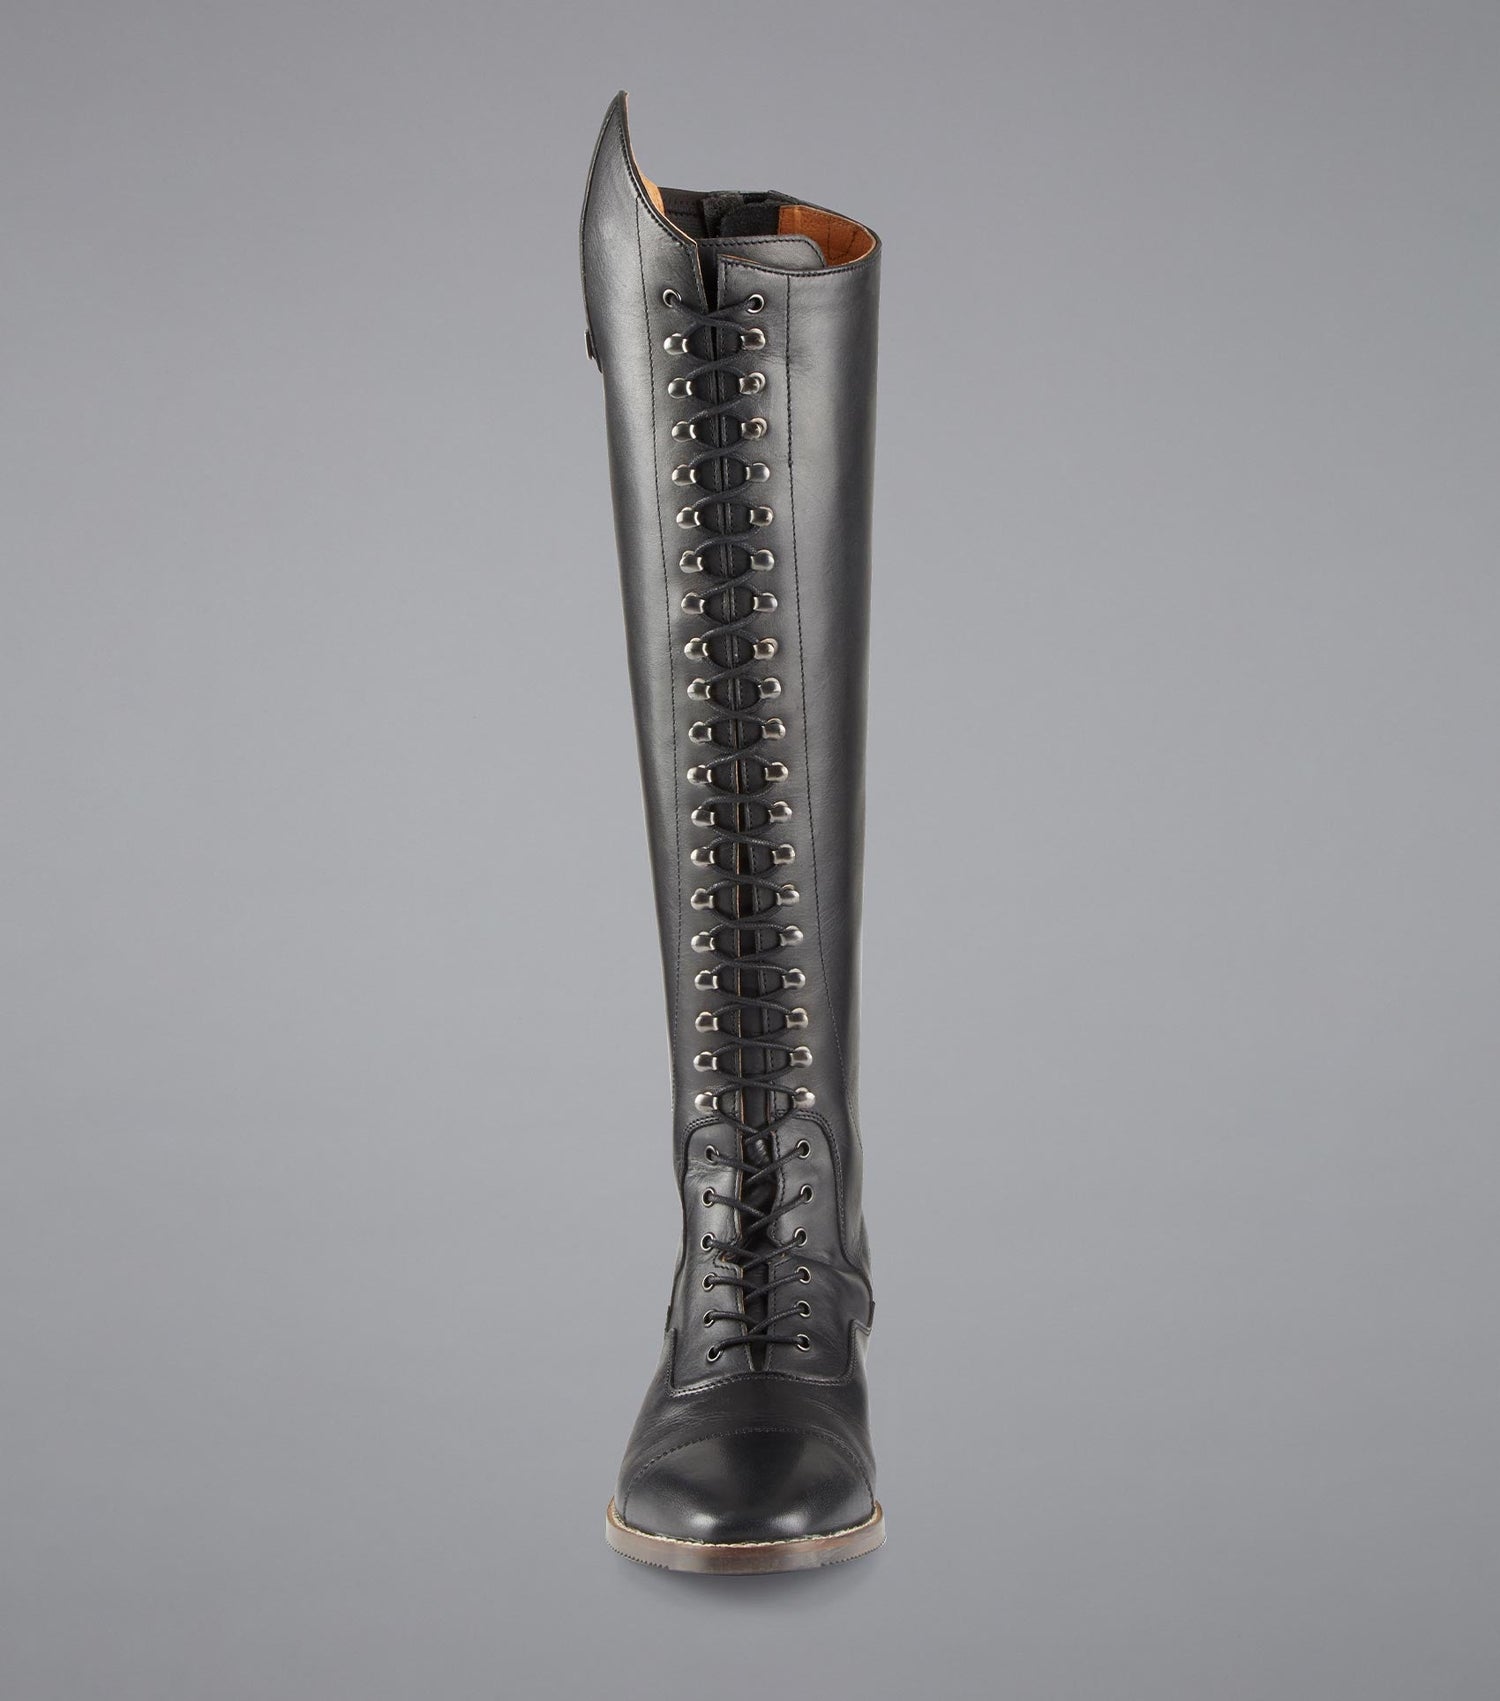 PE Maurizia Ladies Lace Front Tall Leather Riding Boot